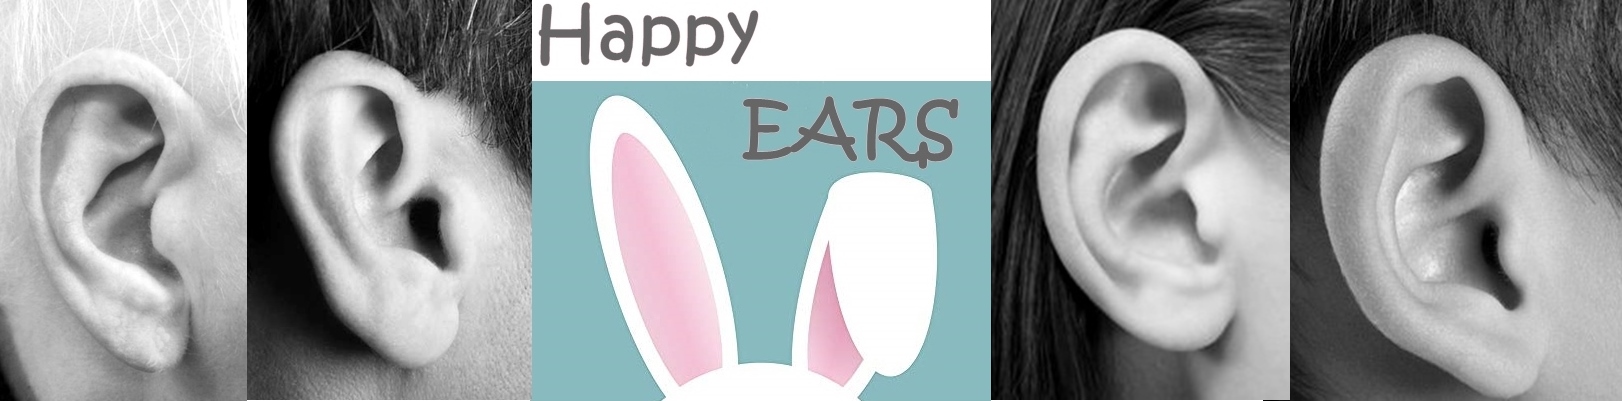 Hyperbaric Oxygen Treatment – Tricks for Securing Happy Ears